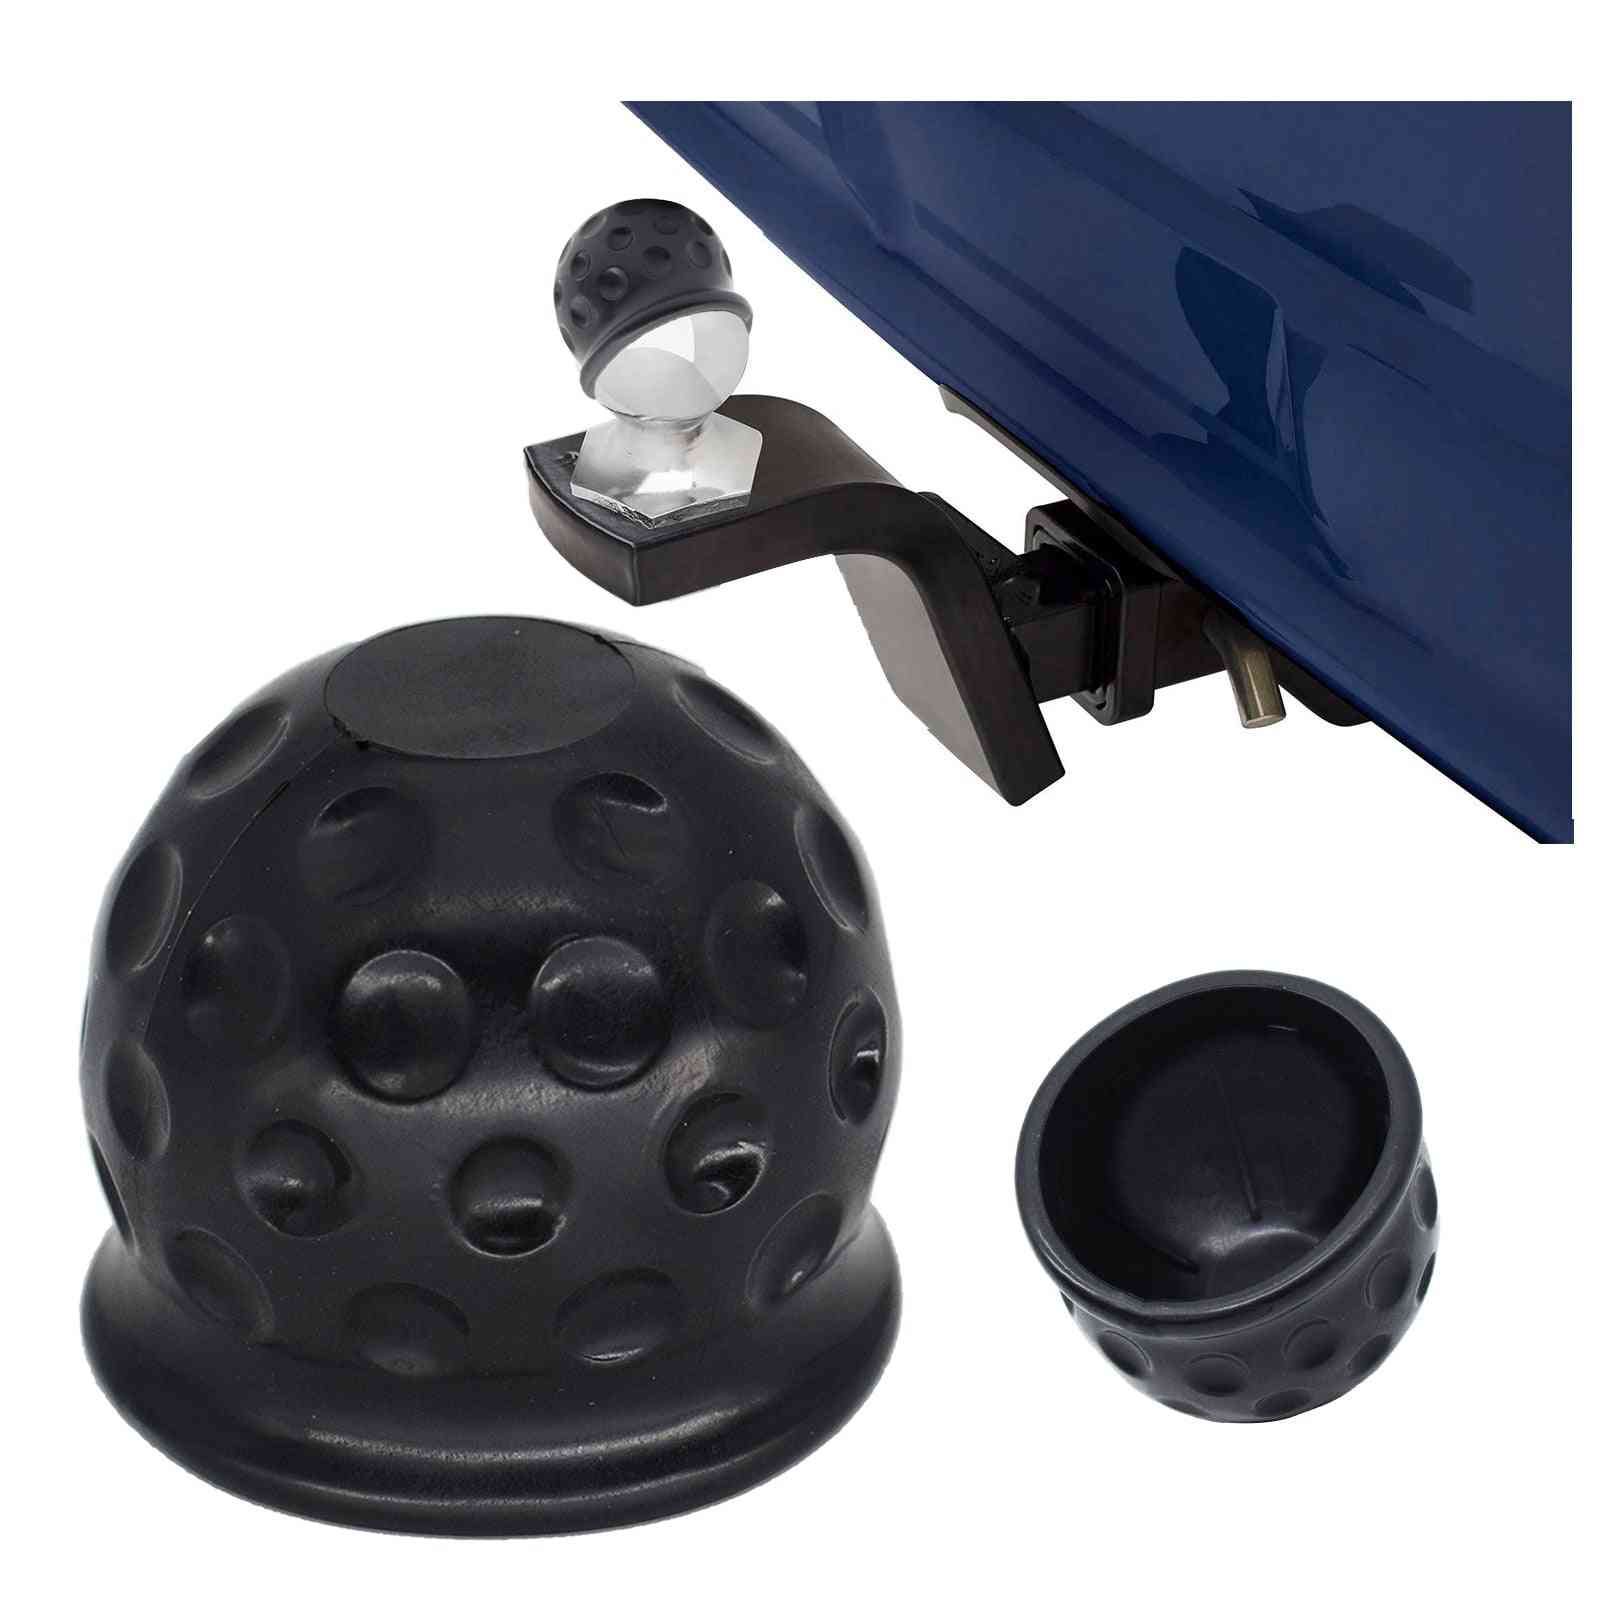 Tow-bar, Ball Cover Cap, Trailer Towing, Hitch Rubber Protect Accessories